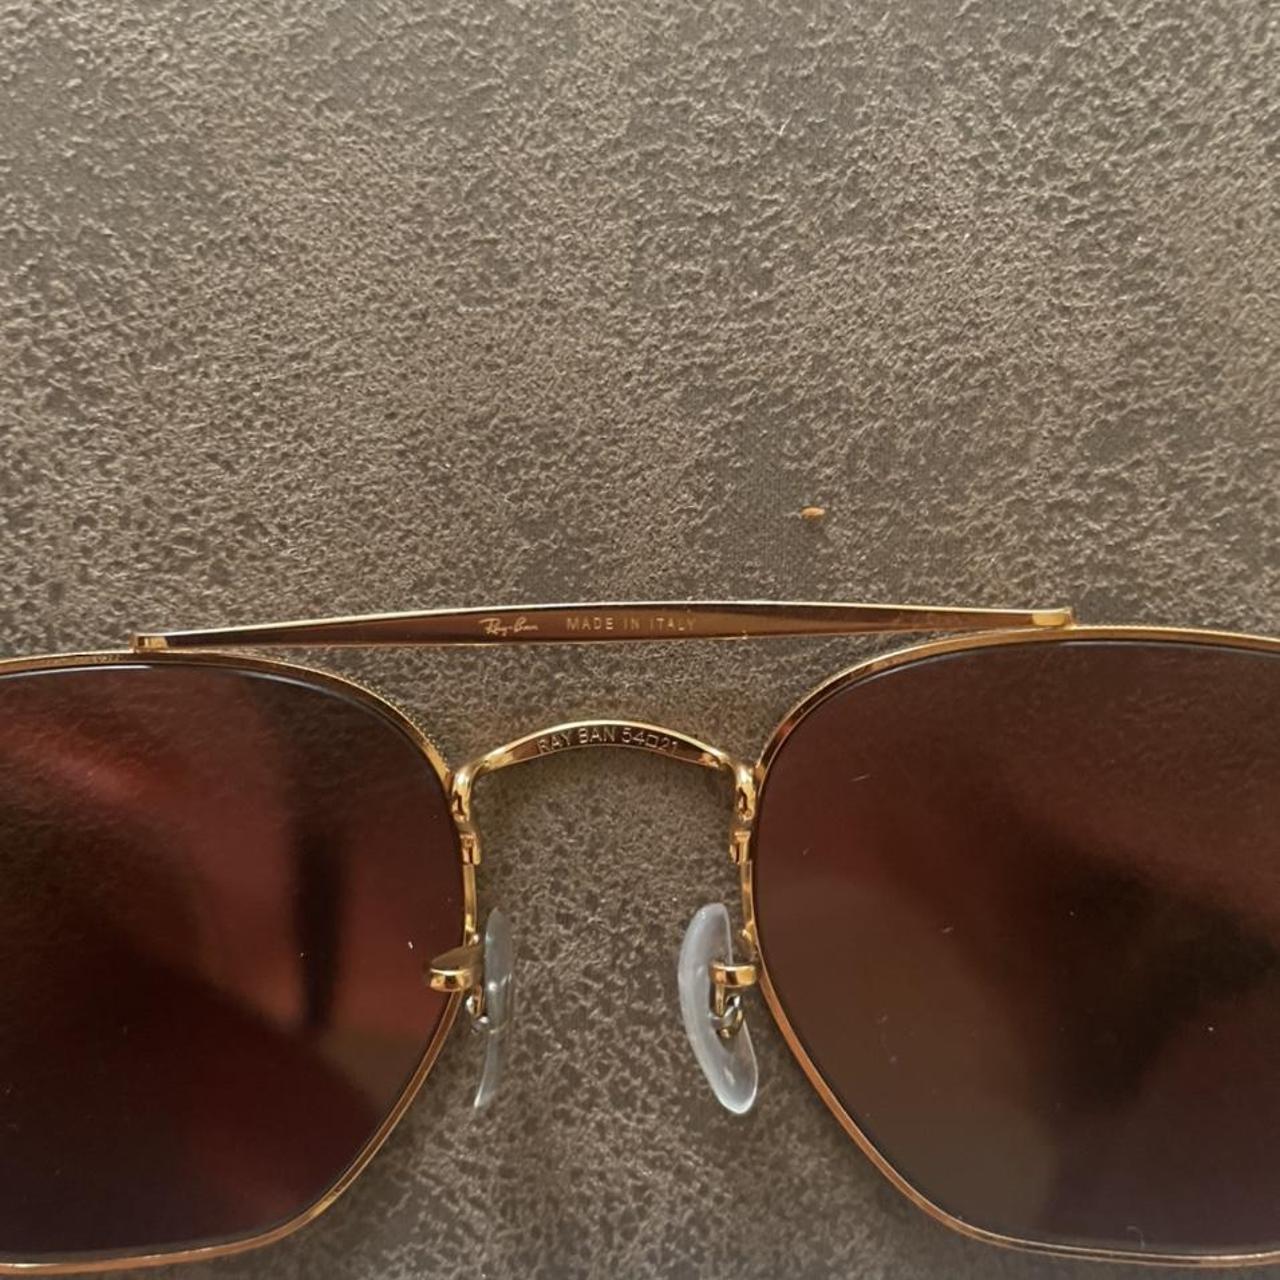 Ray-ban Marshall sunglasses One nose piece has been... - Depop